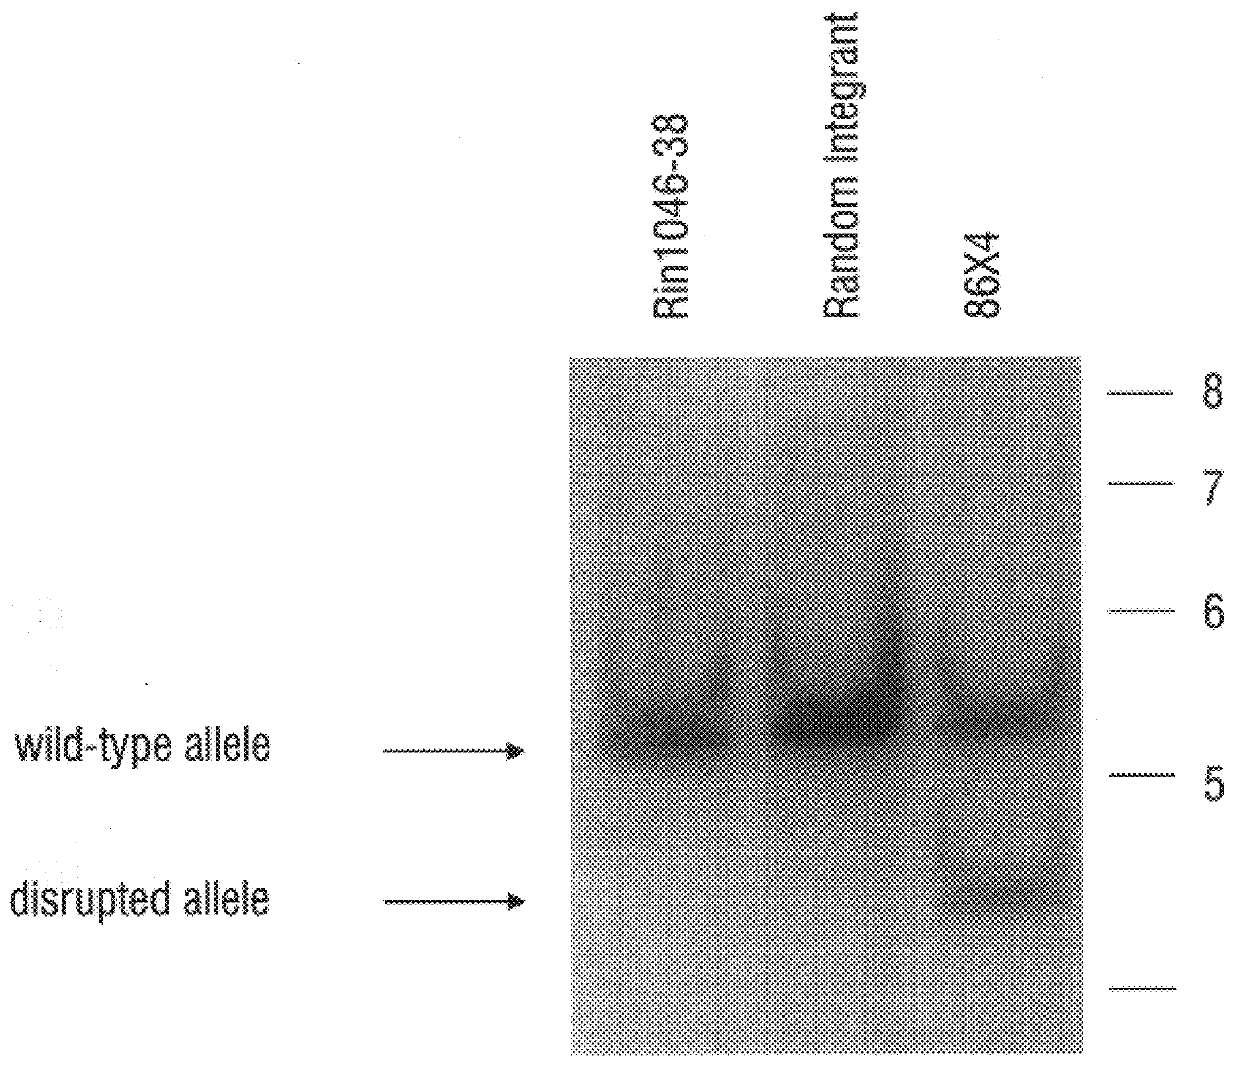 Recombinant expression of proteins from secretory cell lines